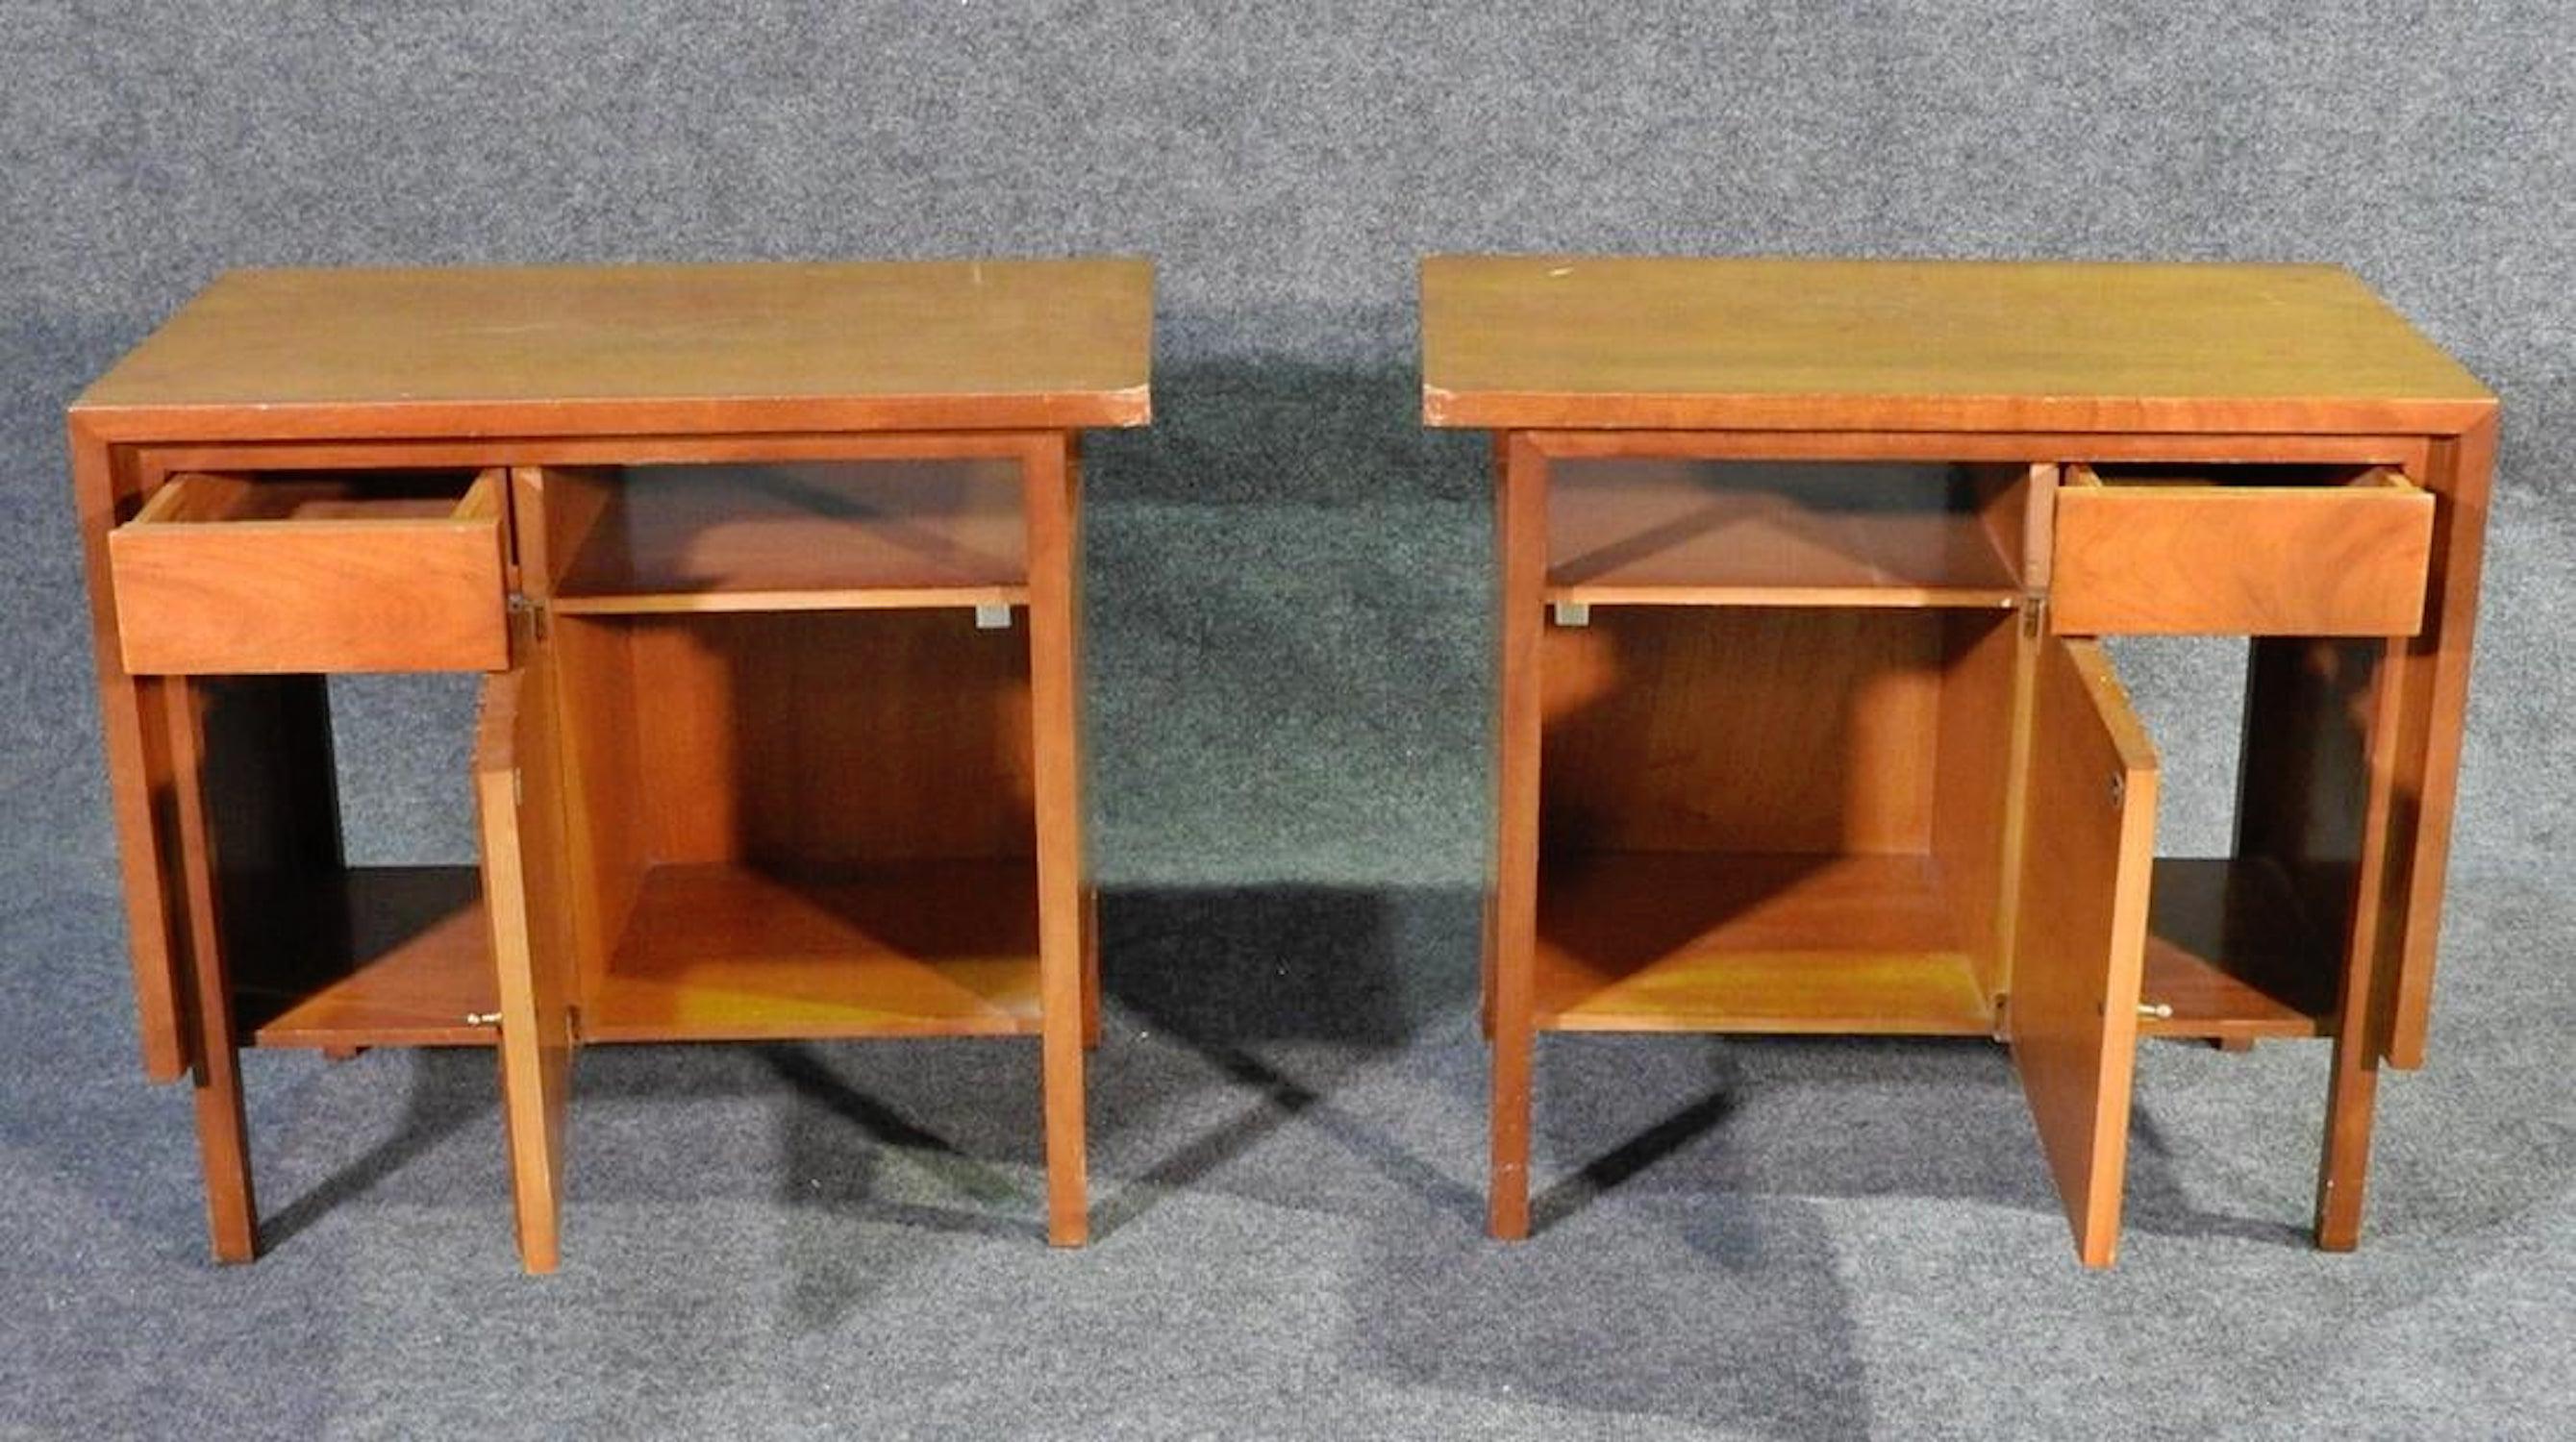 Mid-Century Modern nightstands by John Widdicomb with cabinet and drawer storage.
(Please confirm item location - NY or NJ - with dealer). 
  